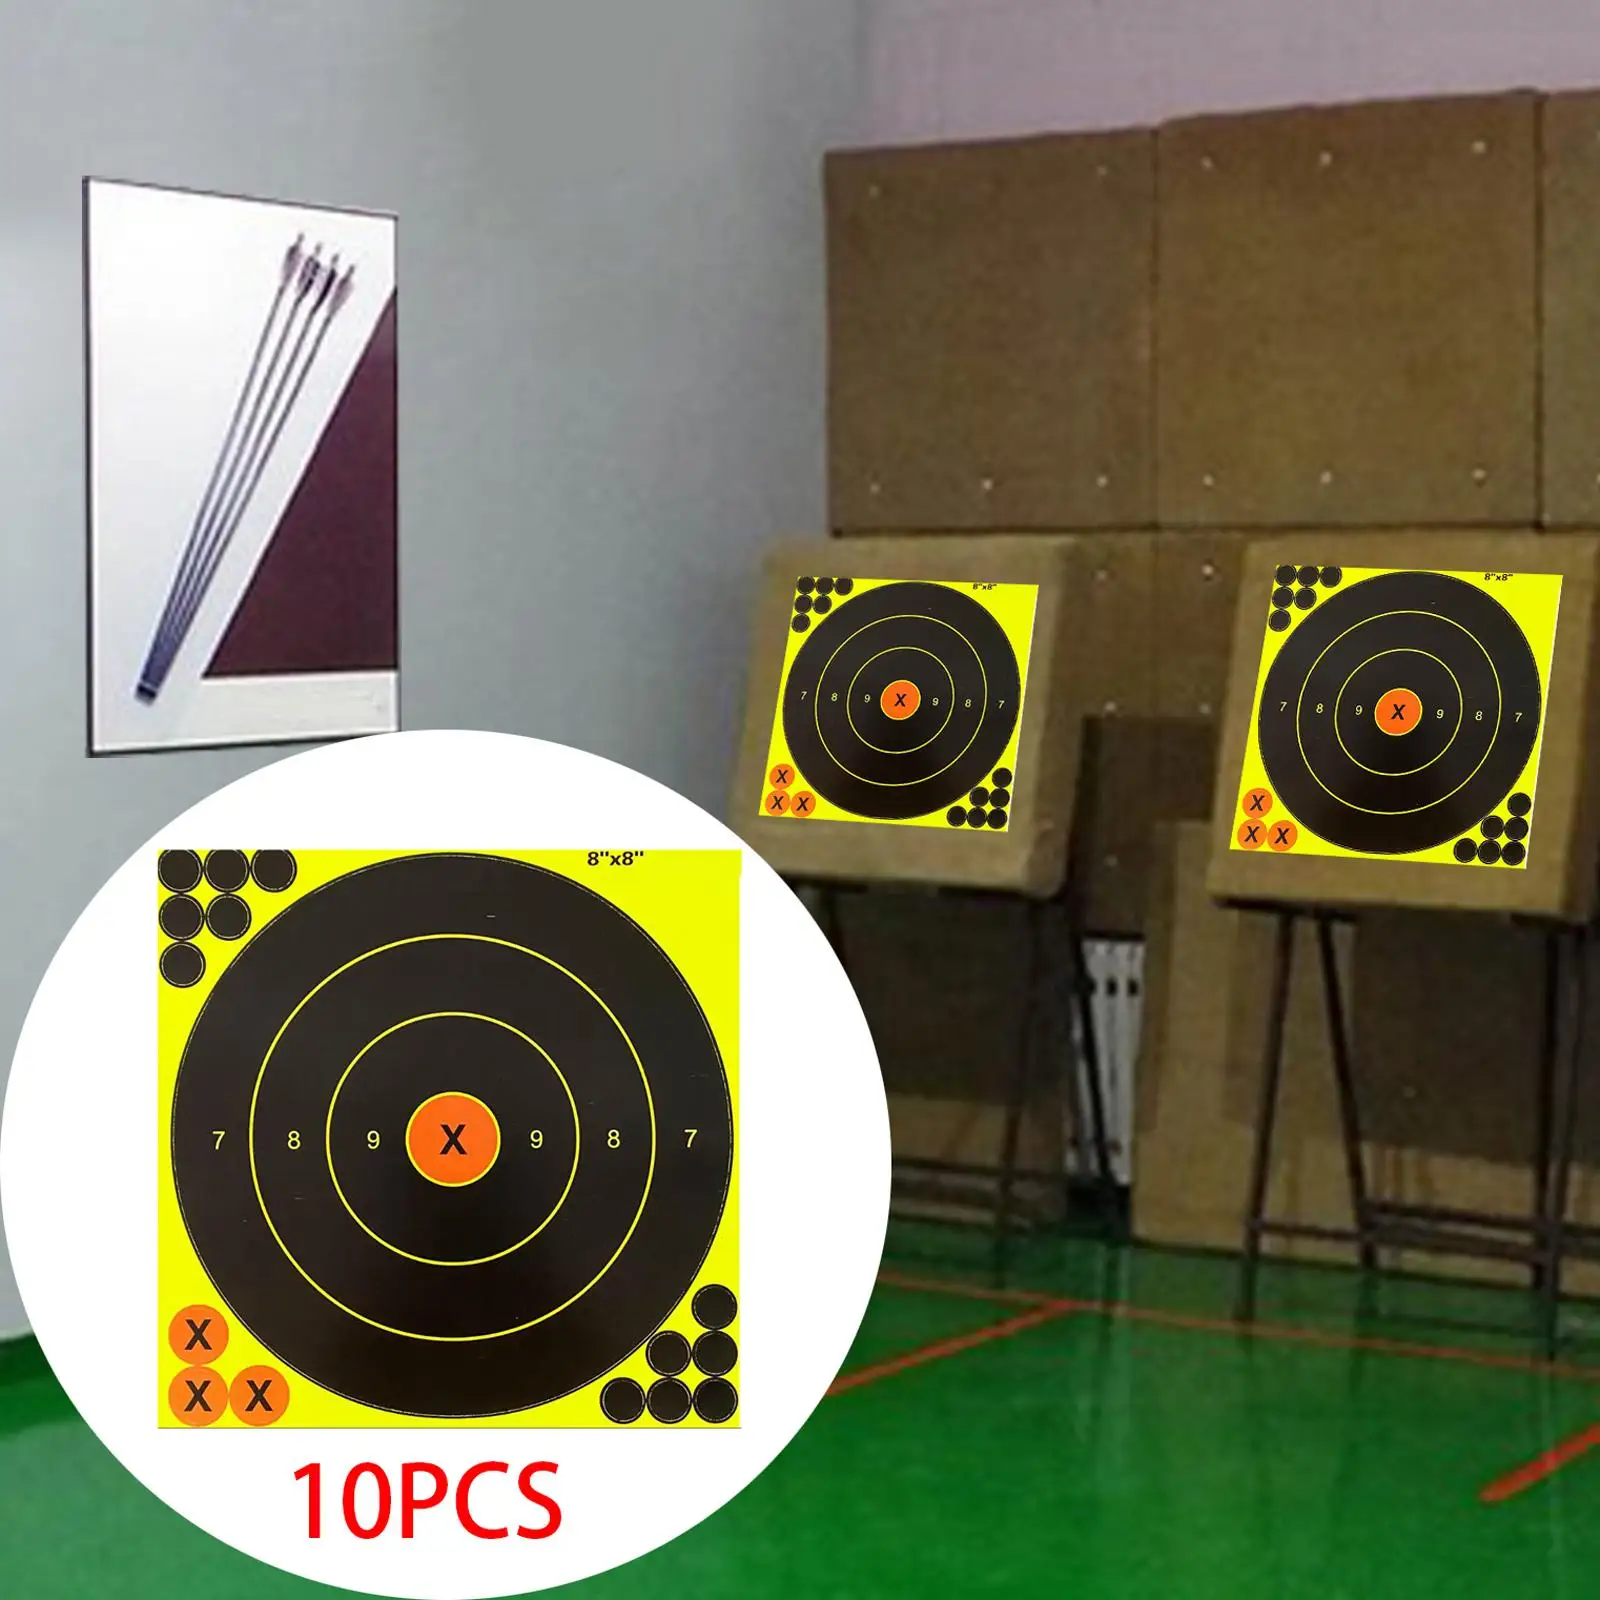 10 Pieces 8 inch Shooting Target Paper Targets Stickers Self Adhesive Replacement Reactive for Shooting Practice Outdoor